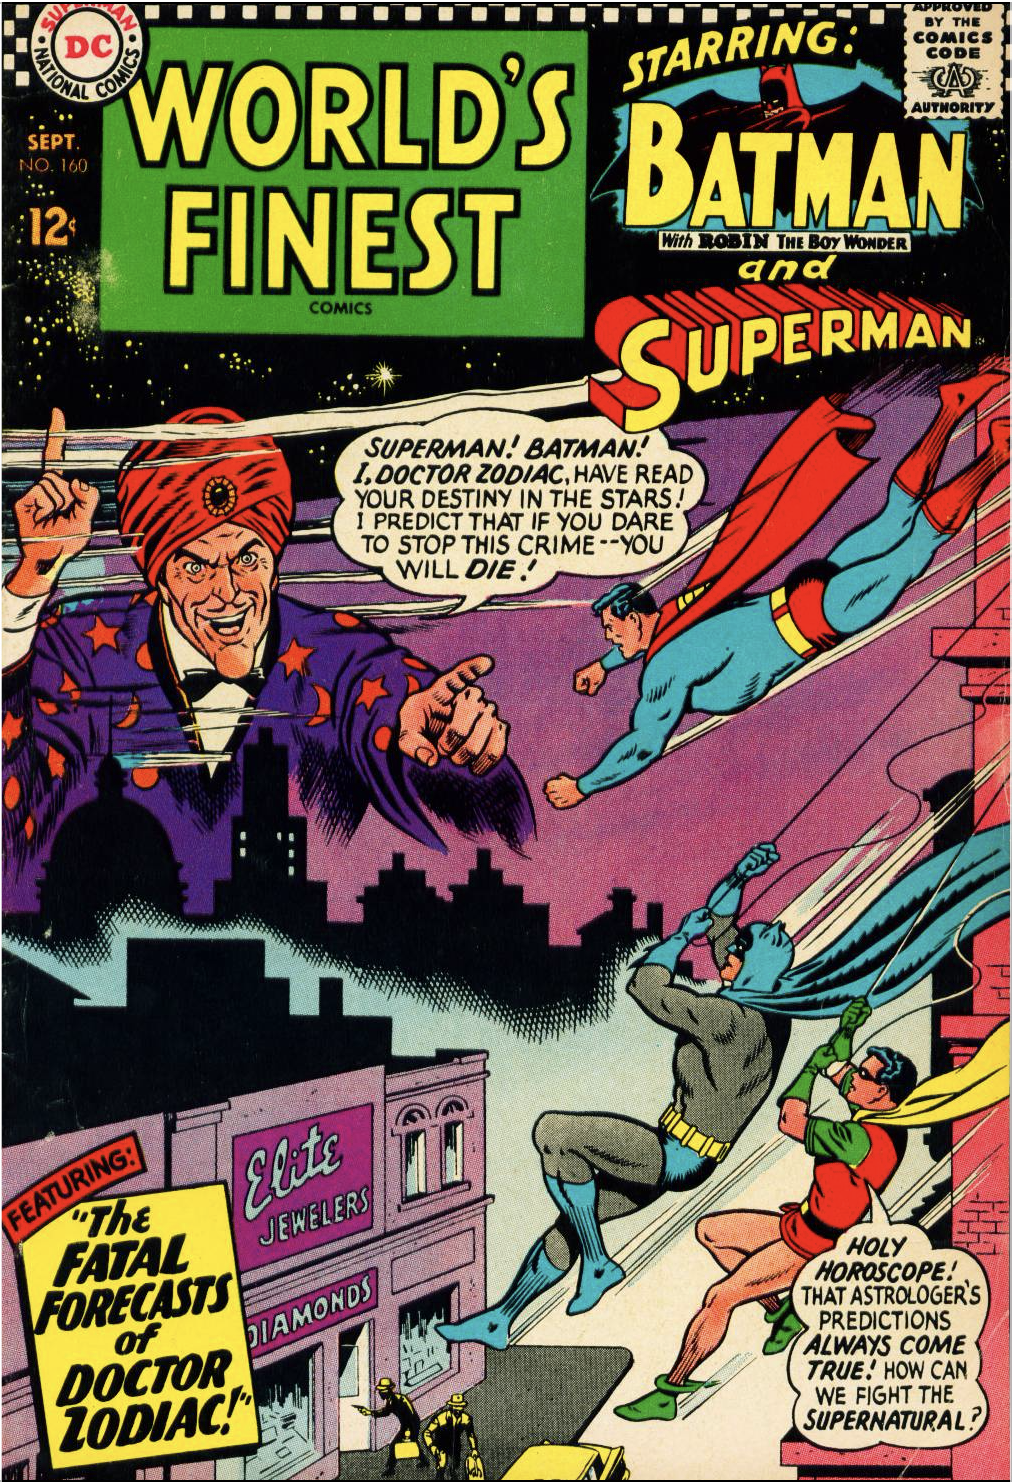 Is Your Capricorn Rising or Are You Just Happy To See Me? (World&#39;s Finest #160)